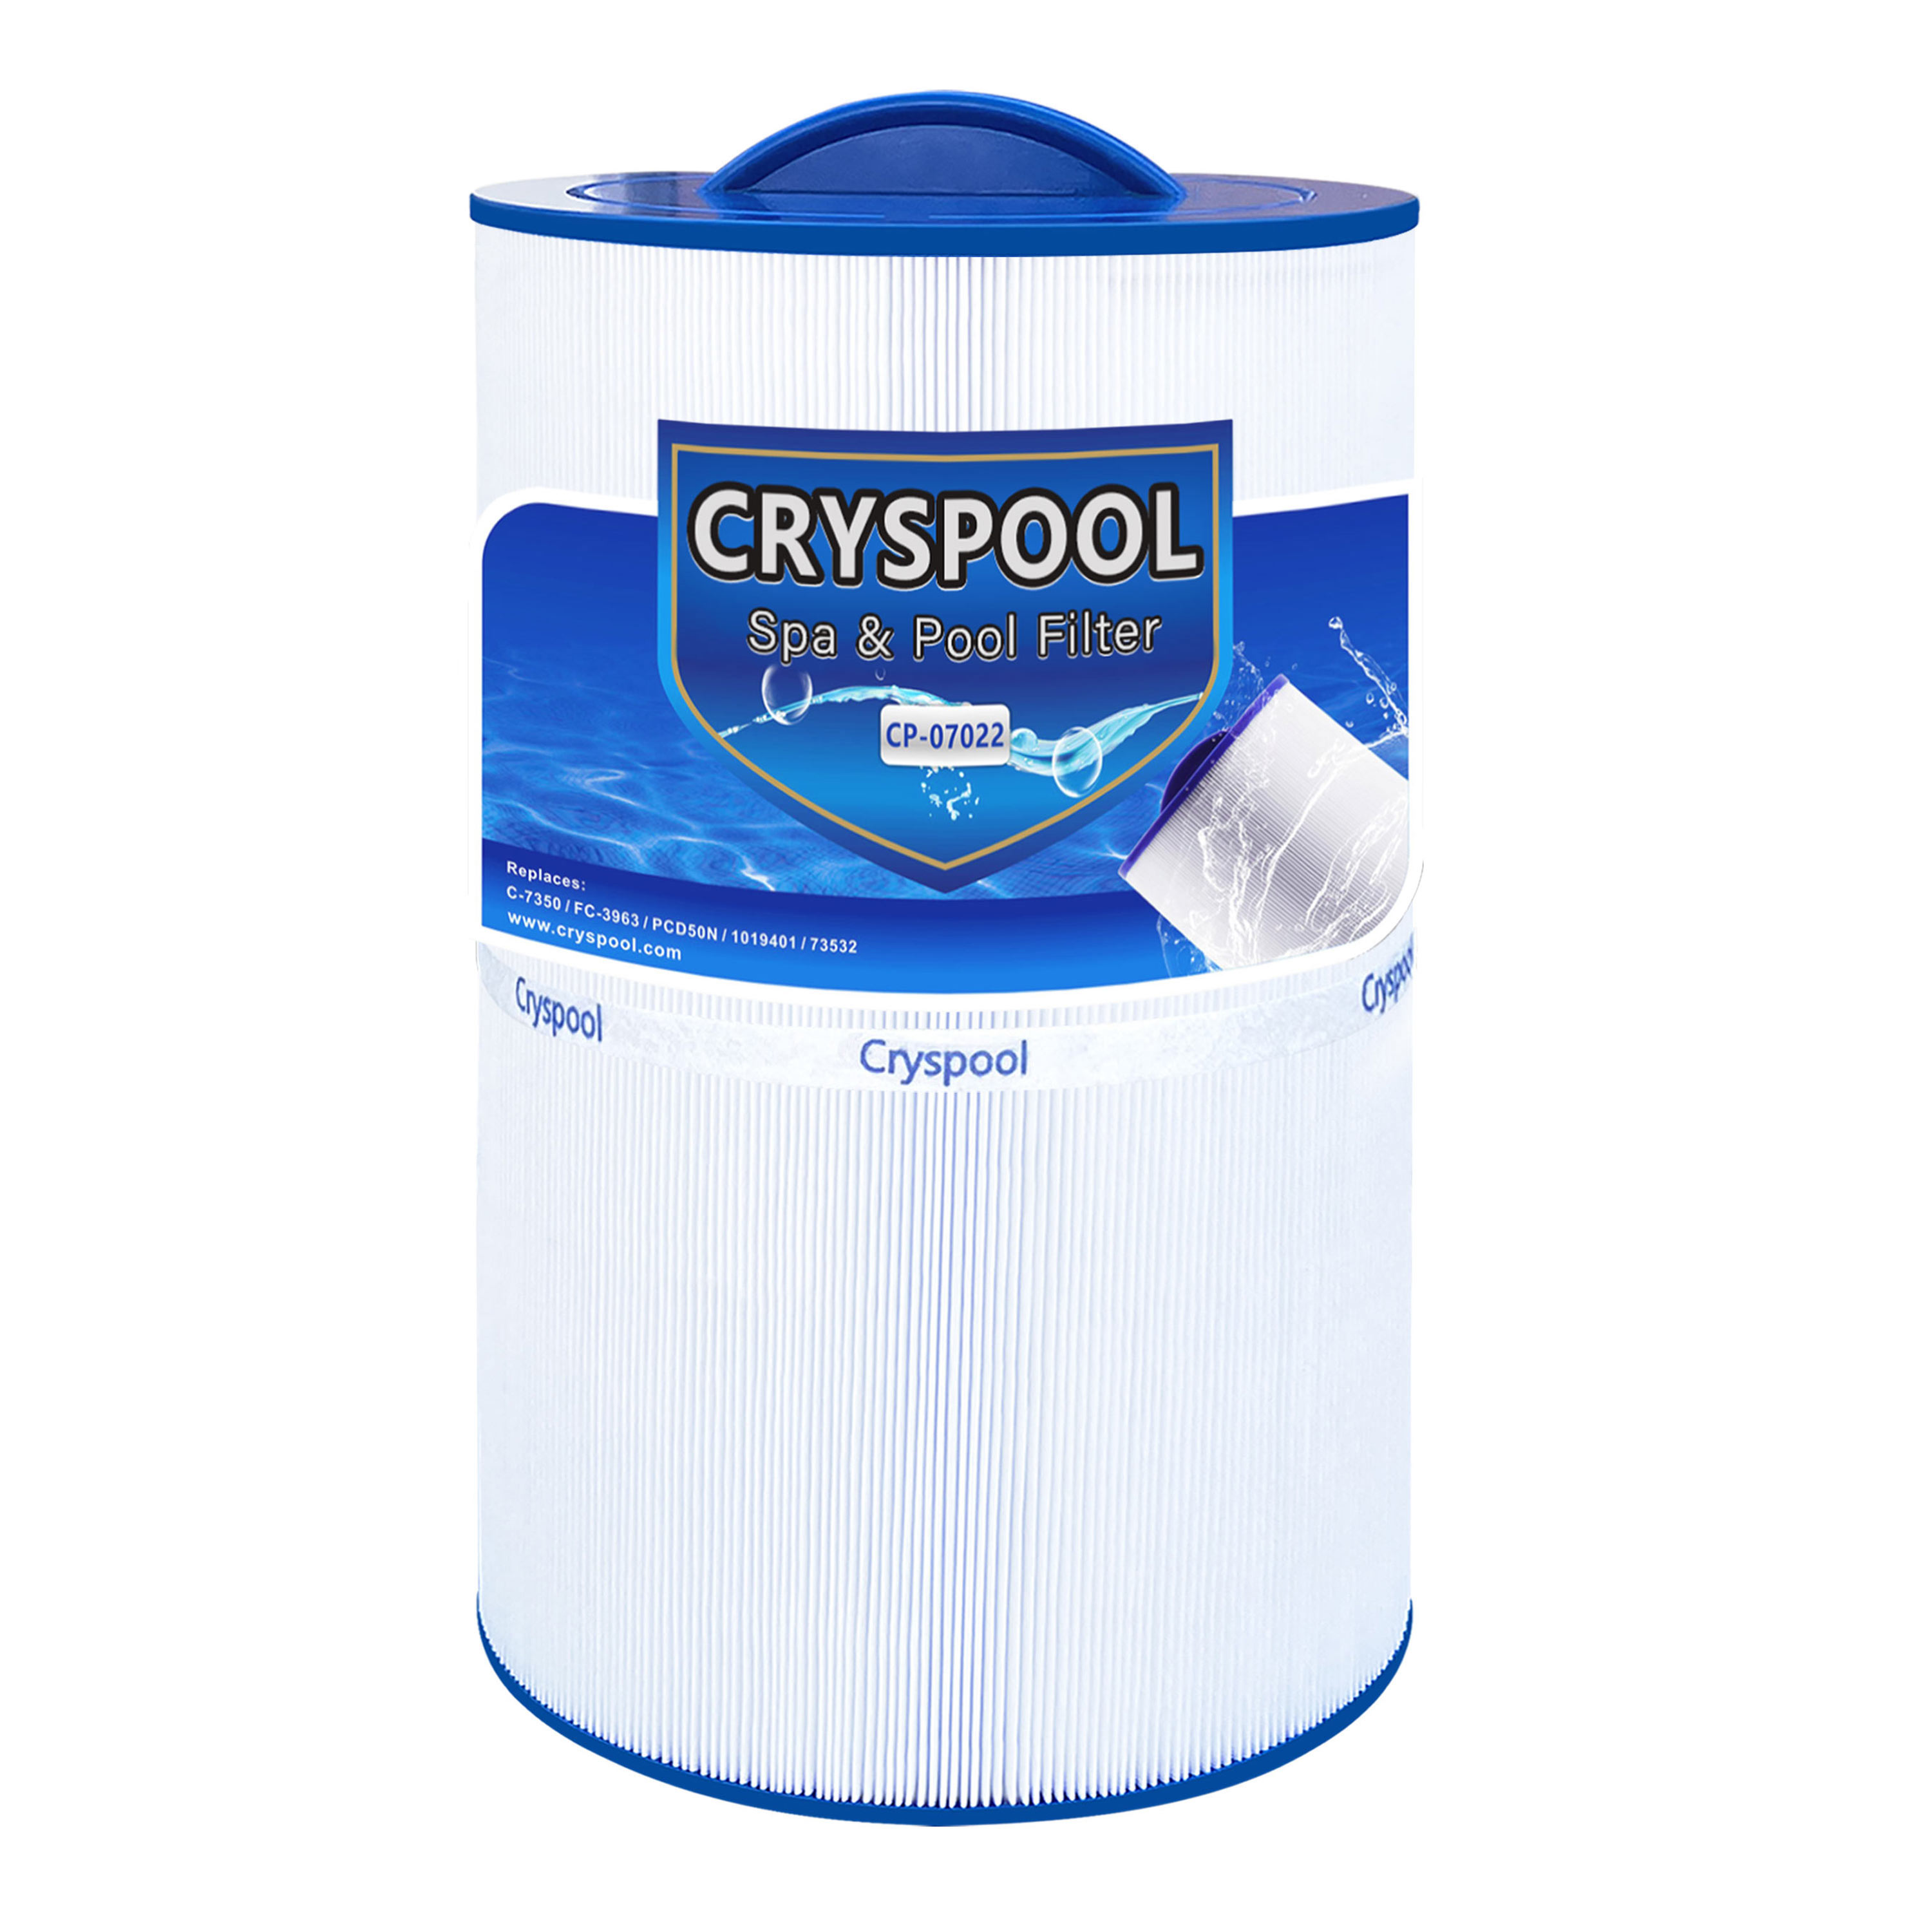 Quality Inspection for Tri X Spa Filter - Cryspool Spa Filter Compatible with Caldera 50, Caldera Spas, Unicel C-7350, 1019401, 73532, PCD50N, FC-3963, 50 sq.ft hot tub Filter – Cryspool